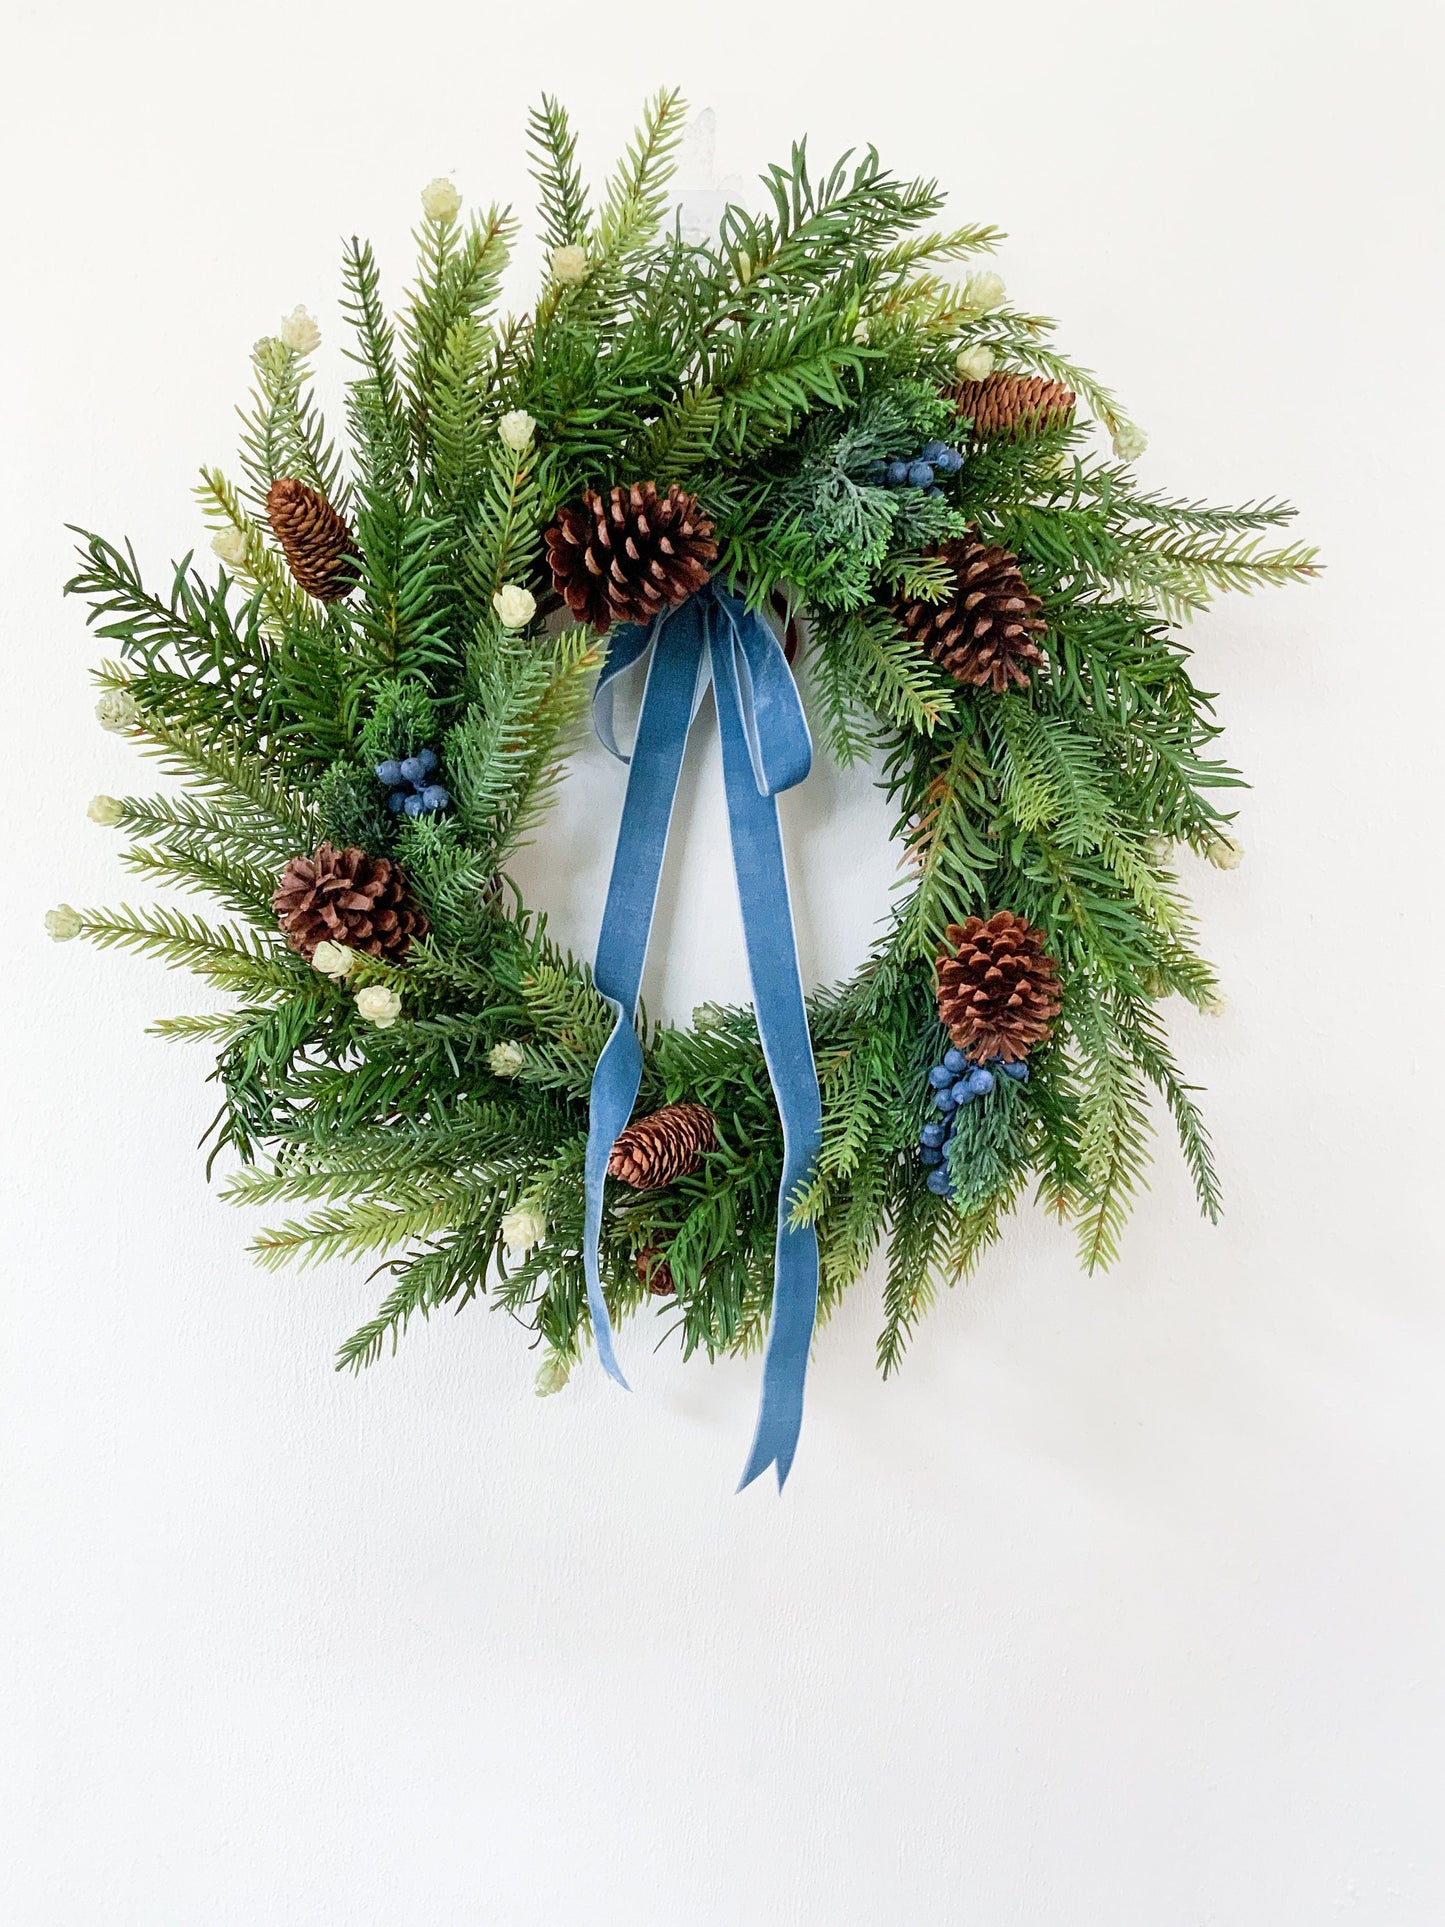 Classic Christmas Wreath w/ Blue Berries and Velvet Ribbon, Rustic Winter Evergreen Wreath w/ Pine for Front Door, Seasonal Home Decor,